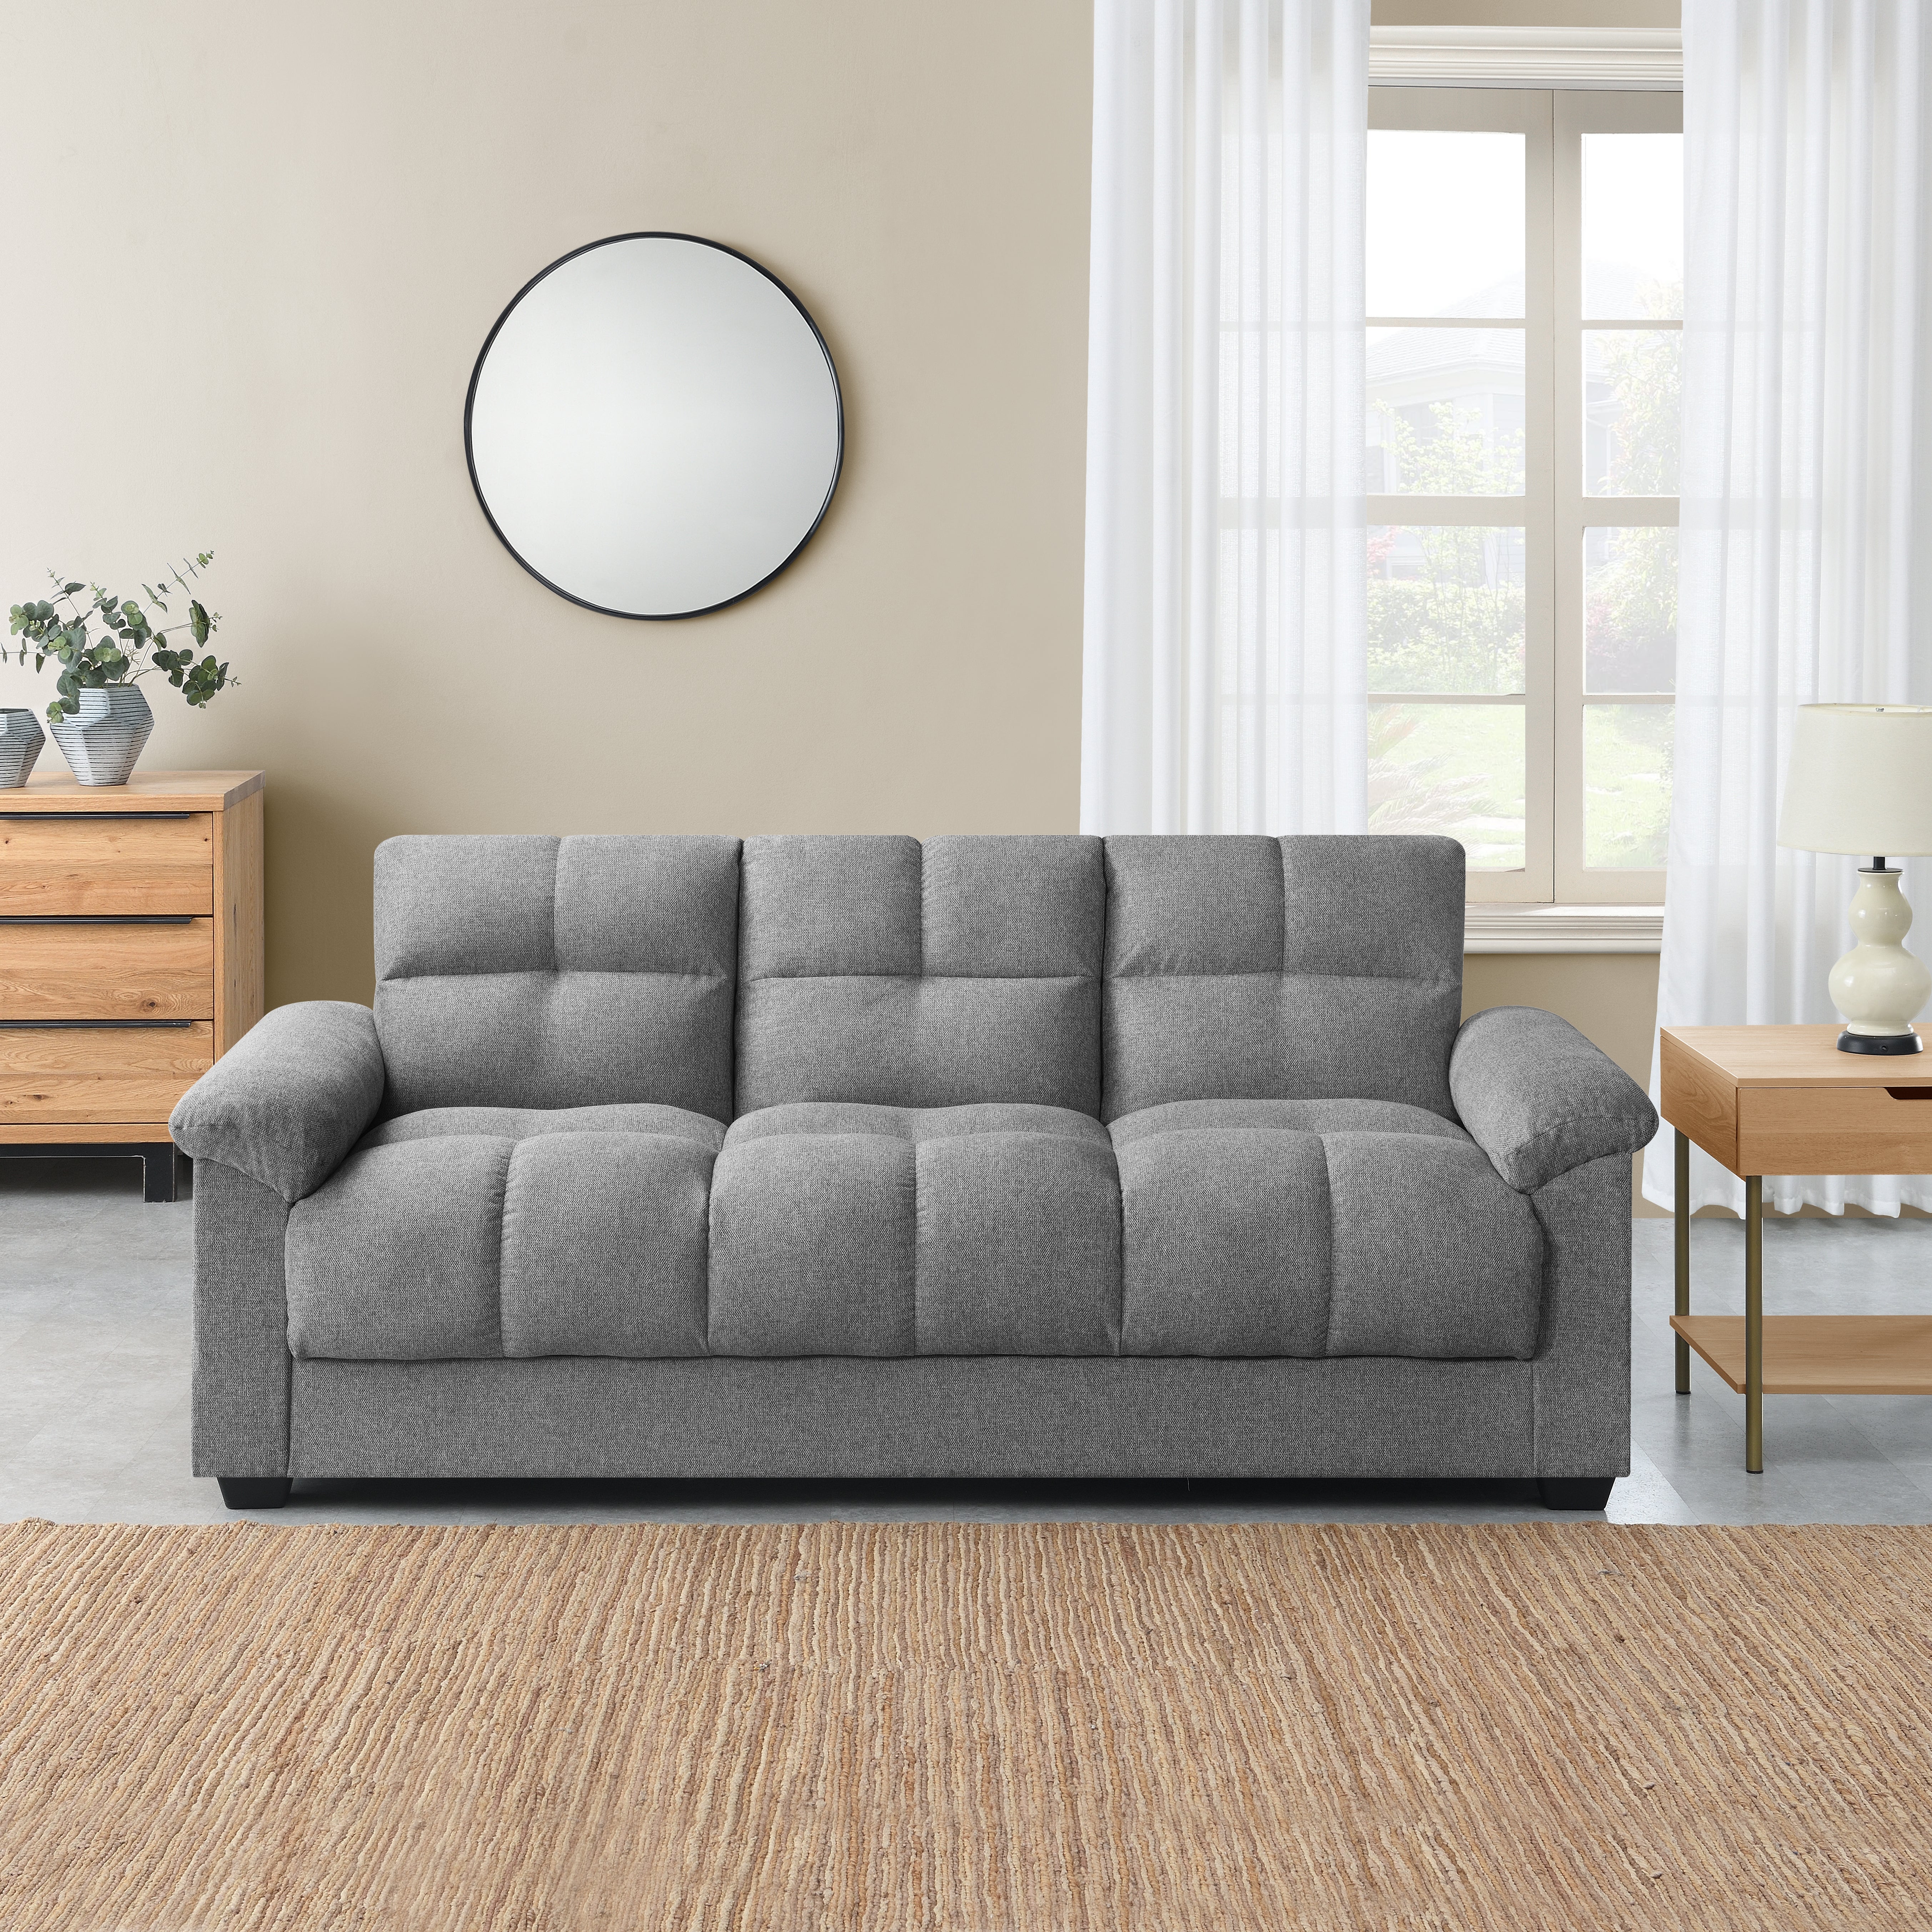 Margo Peppered Grey Fabric Sofa Bed With Storage Peppered Grey